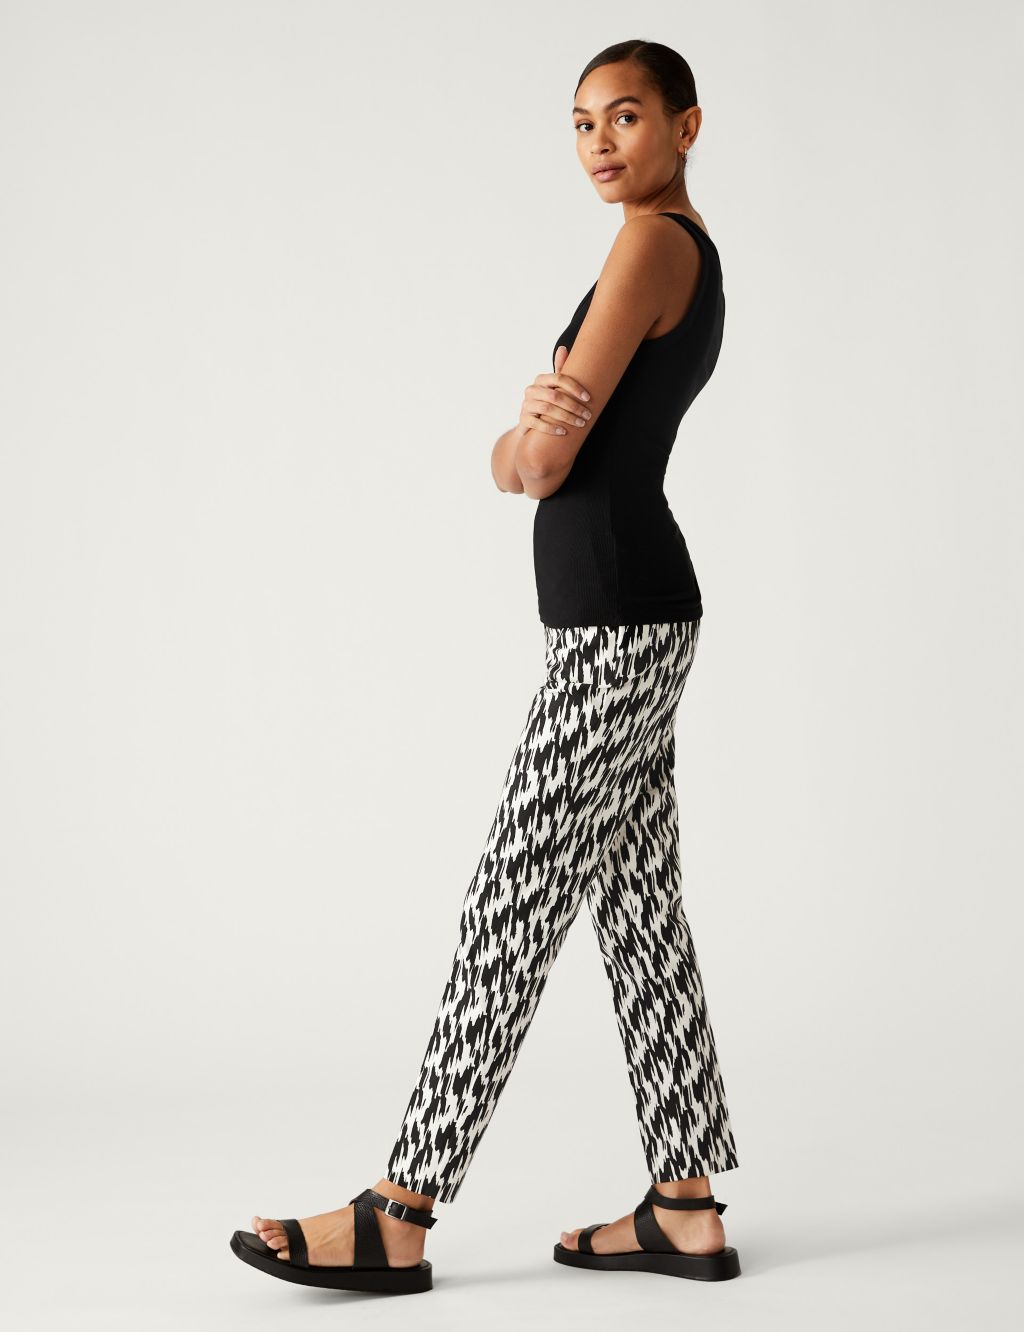 Cotton Blend Printed Slim Fit Trousers image 3